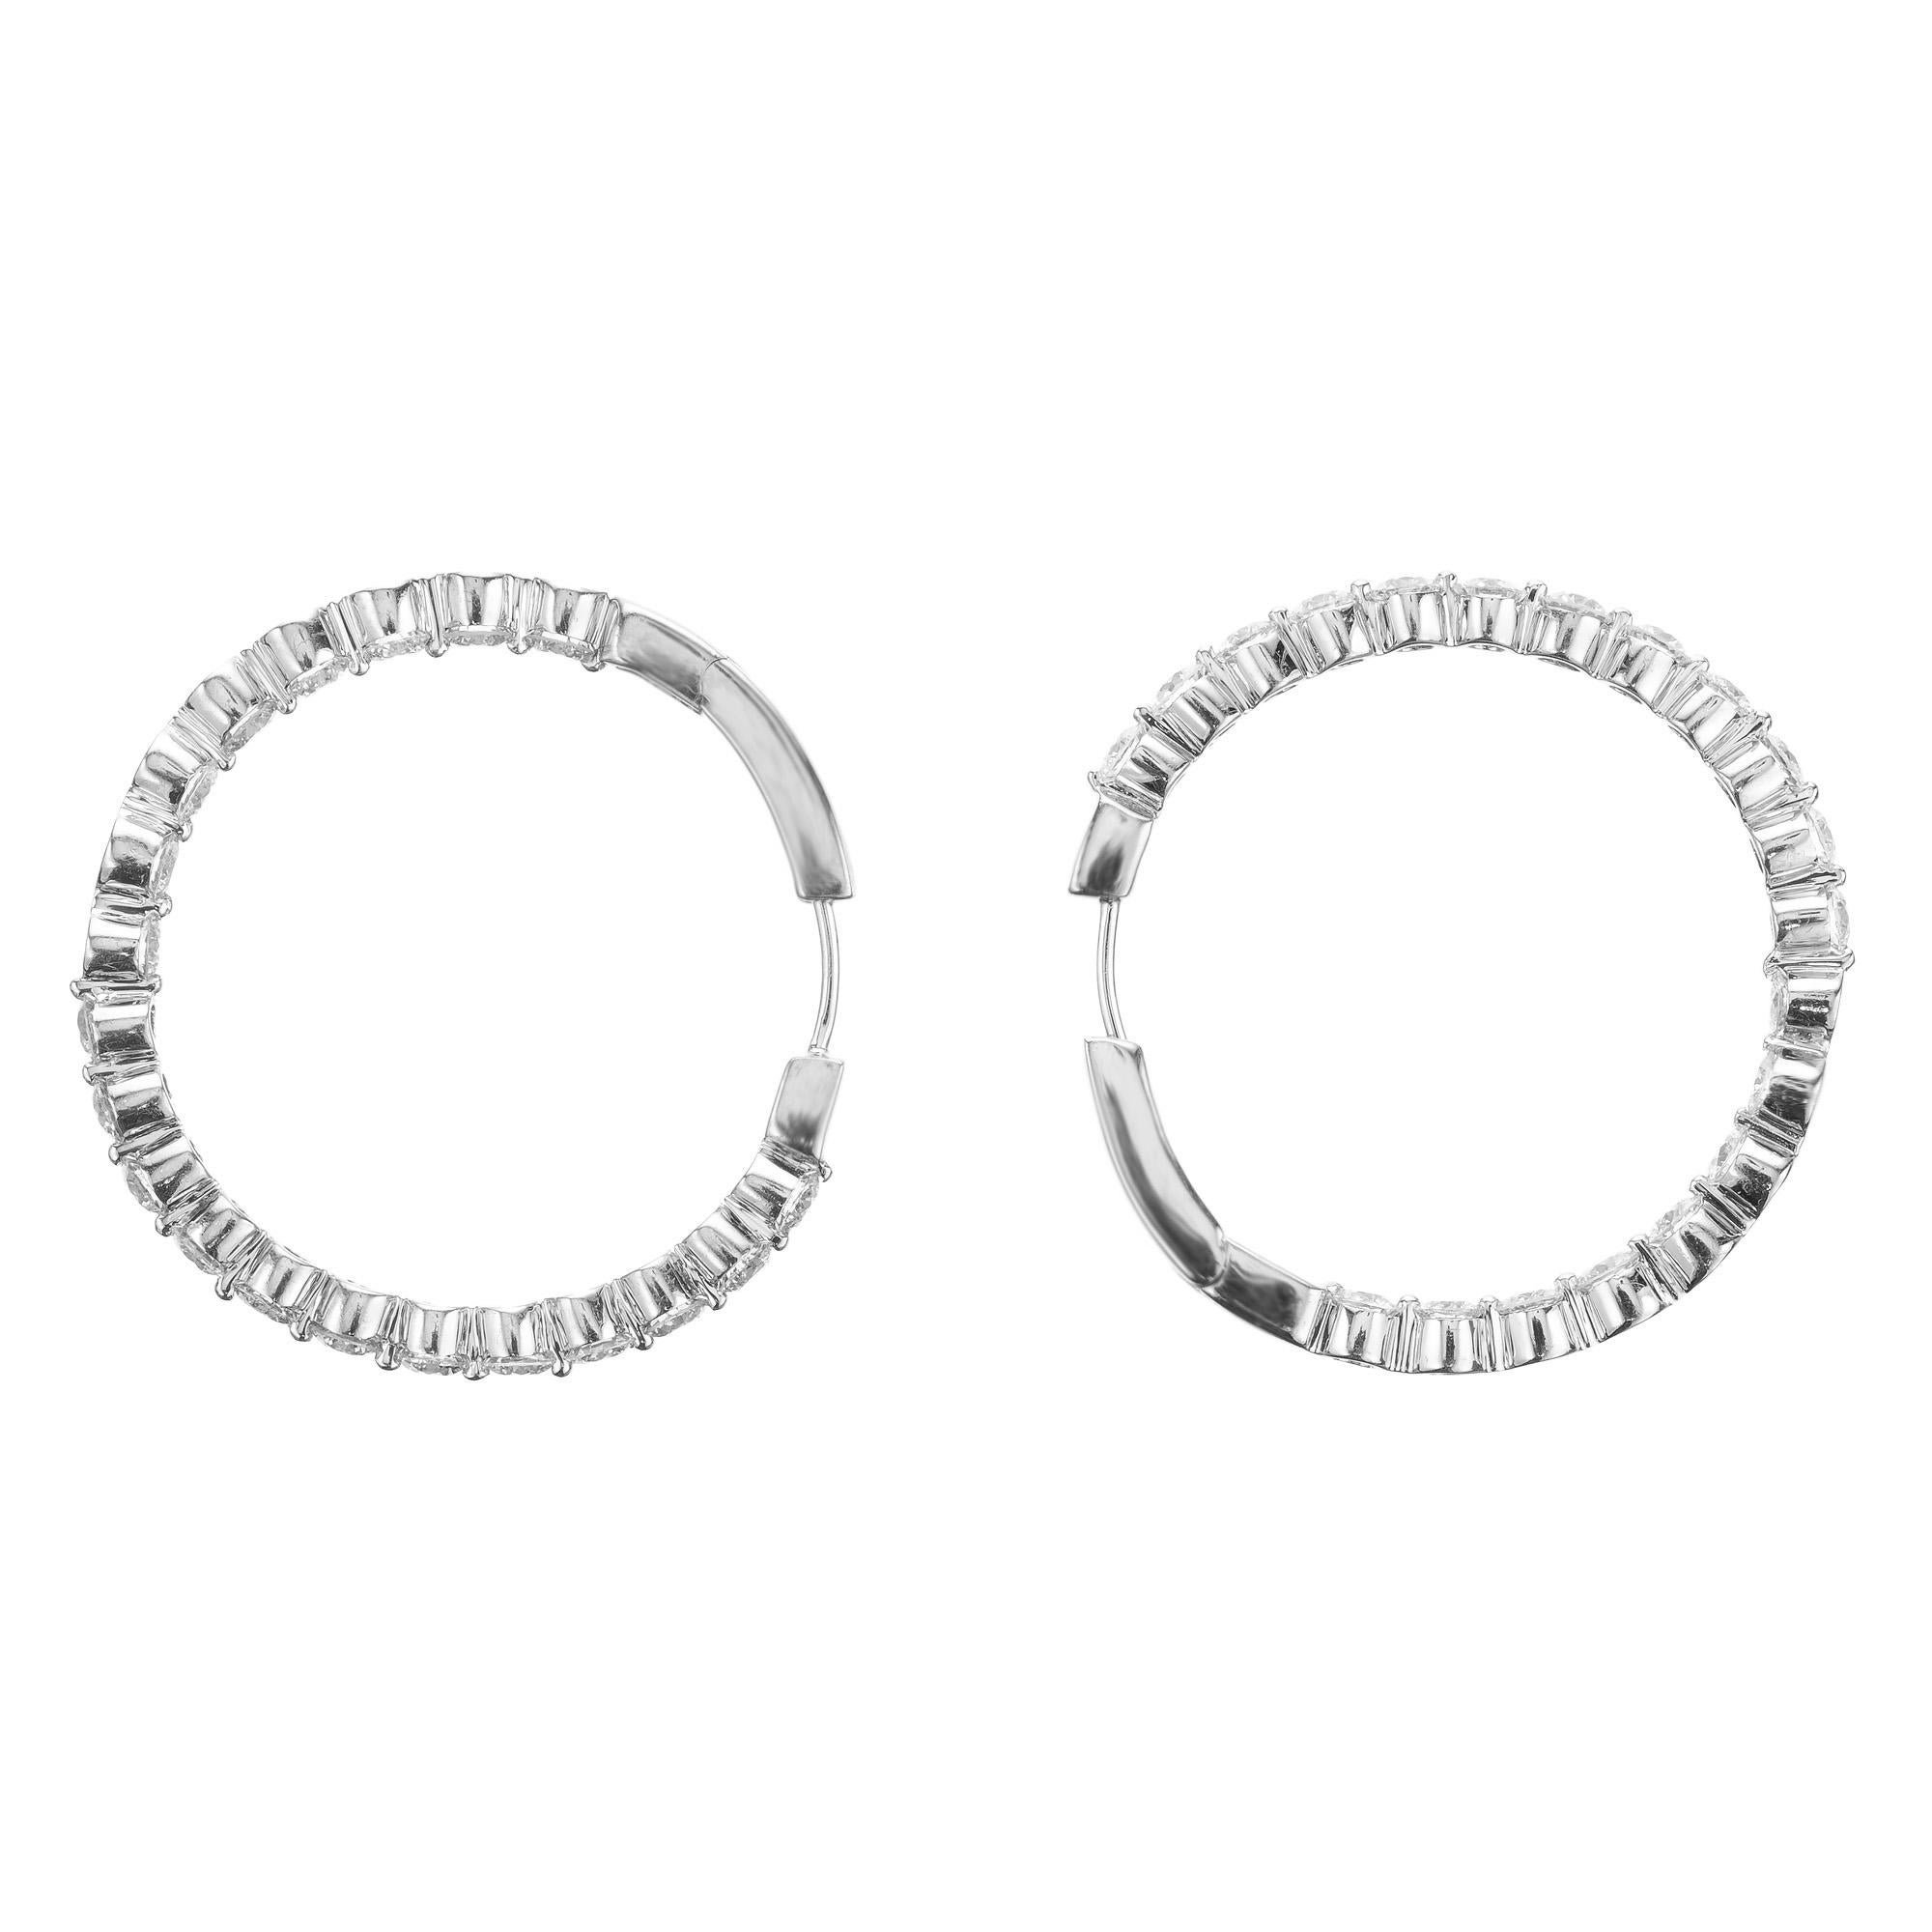 Peter Suchy 5.00 Carat Round Diamond White Gold Hoop Earrings For Sale 2